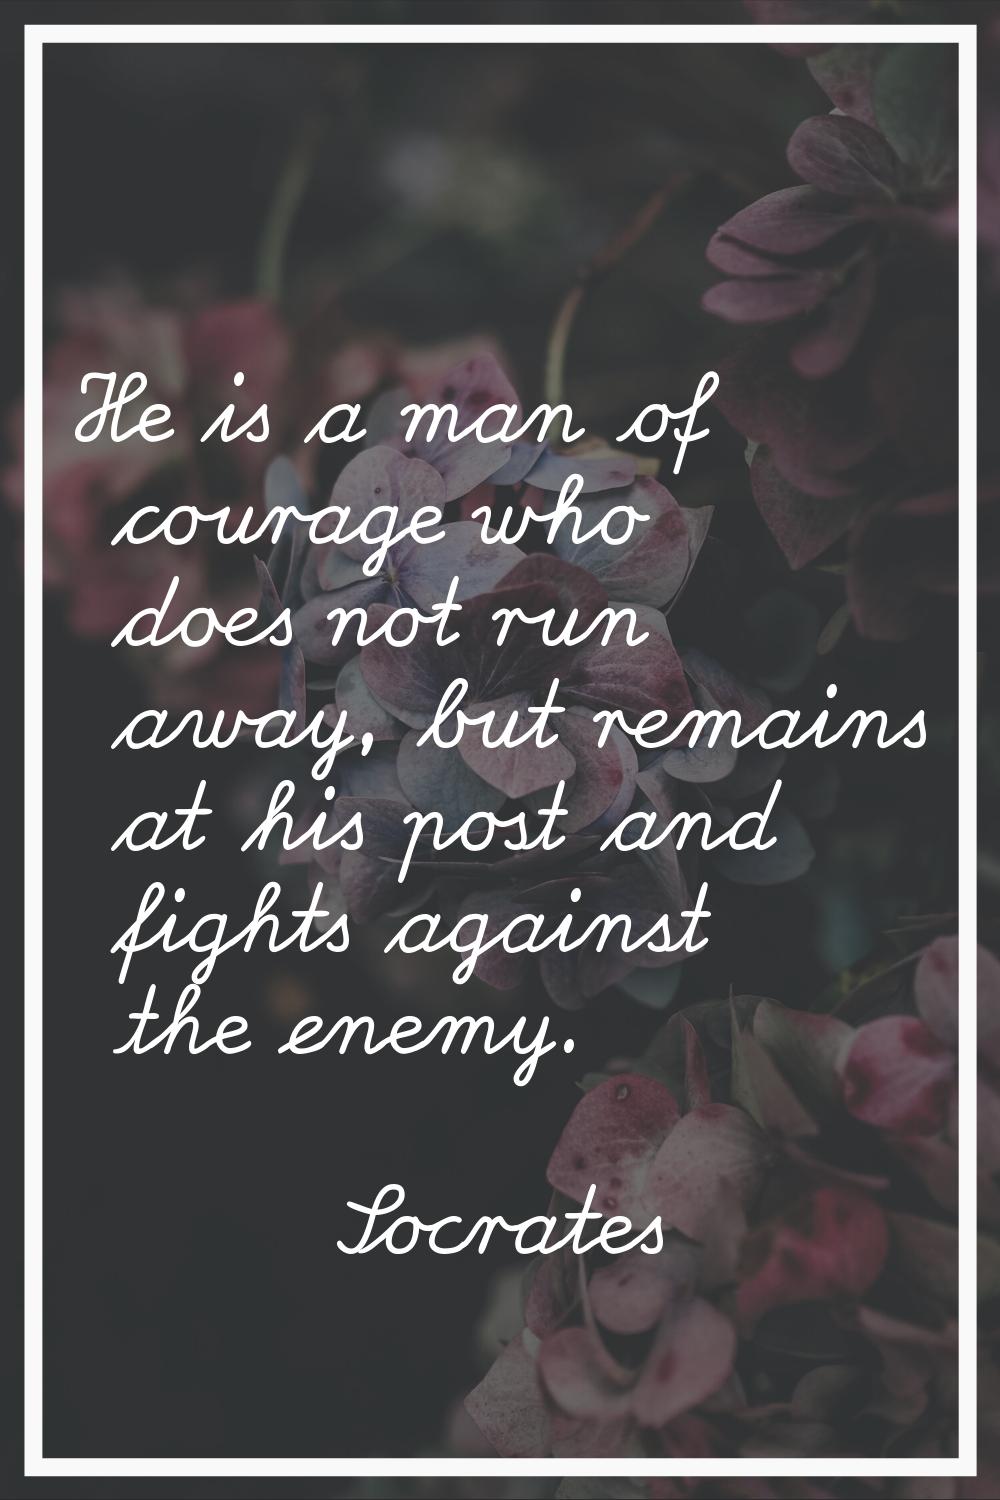 He is a man of courage who does not run away, but remains at his post and fights against the enemy.